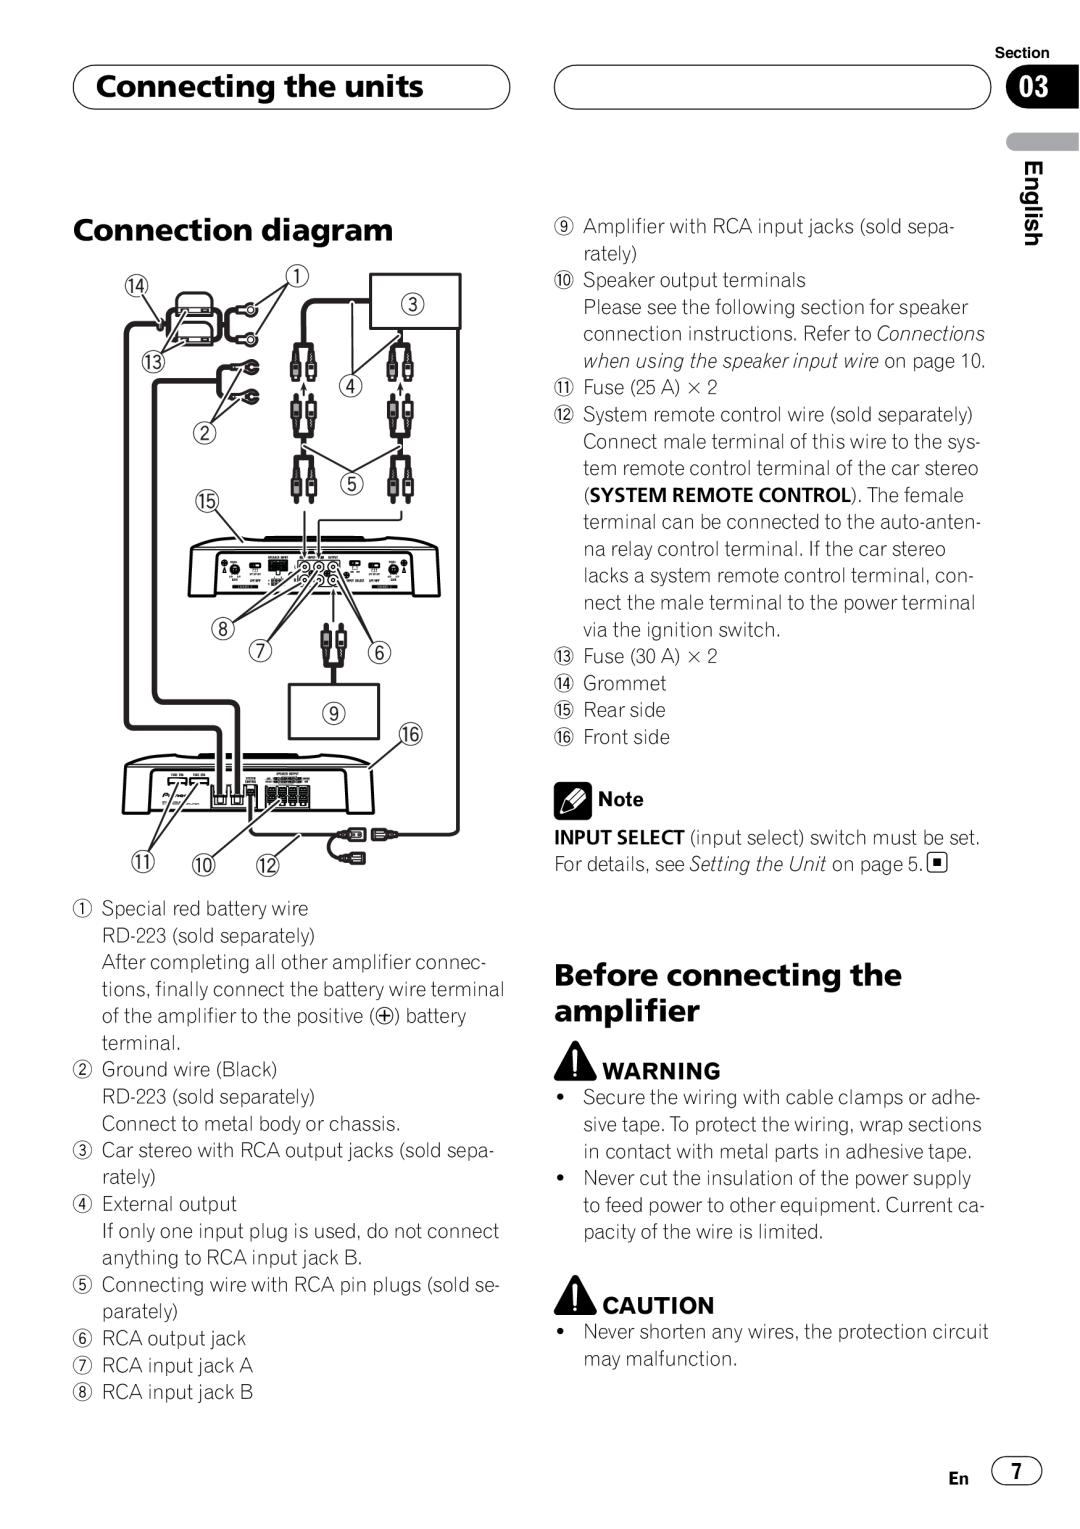 Pioneer GM-6400F owner manual Connecting the units Connection diagram, Before connecting the amplifier 